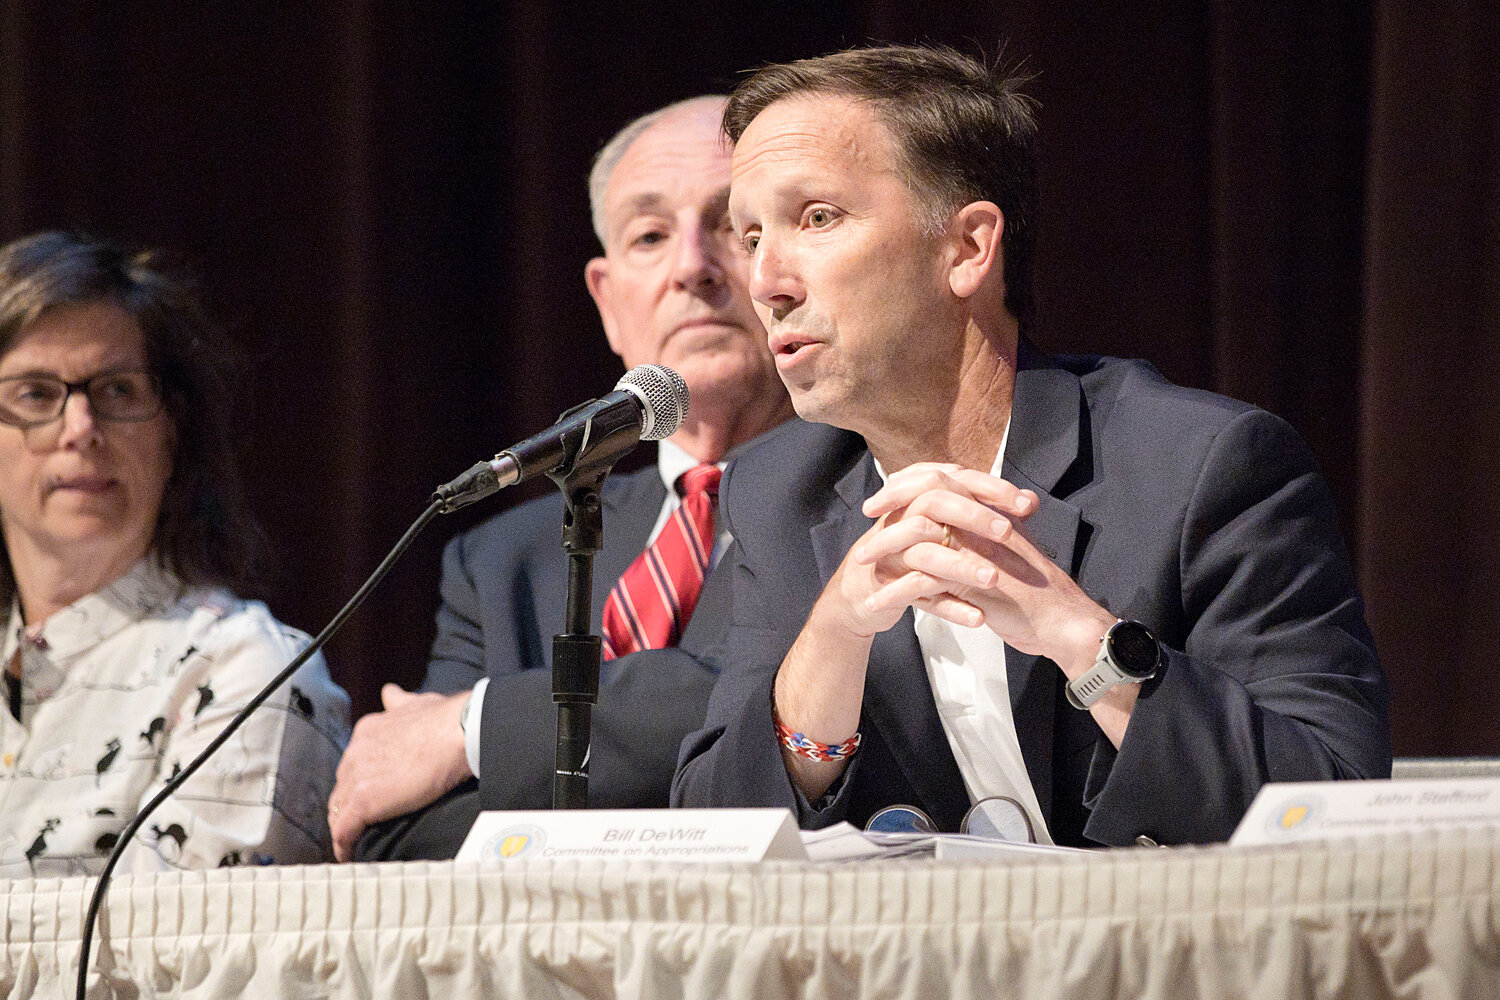 Barrington Committee on Appropriations member Bill DeWitt, shown during the May 24 financial town meeting, opposed the stipend increase.